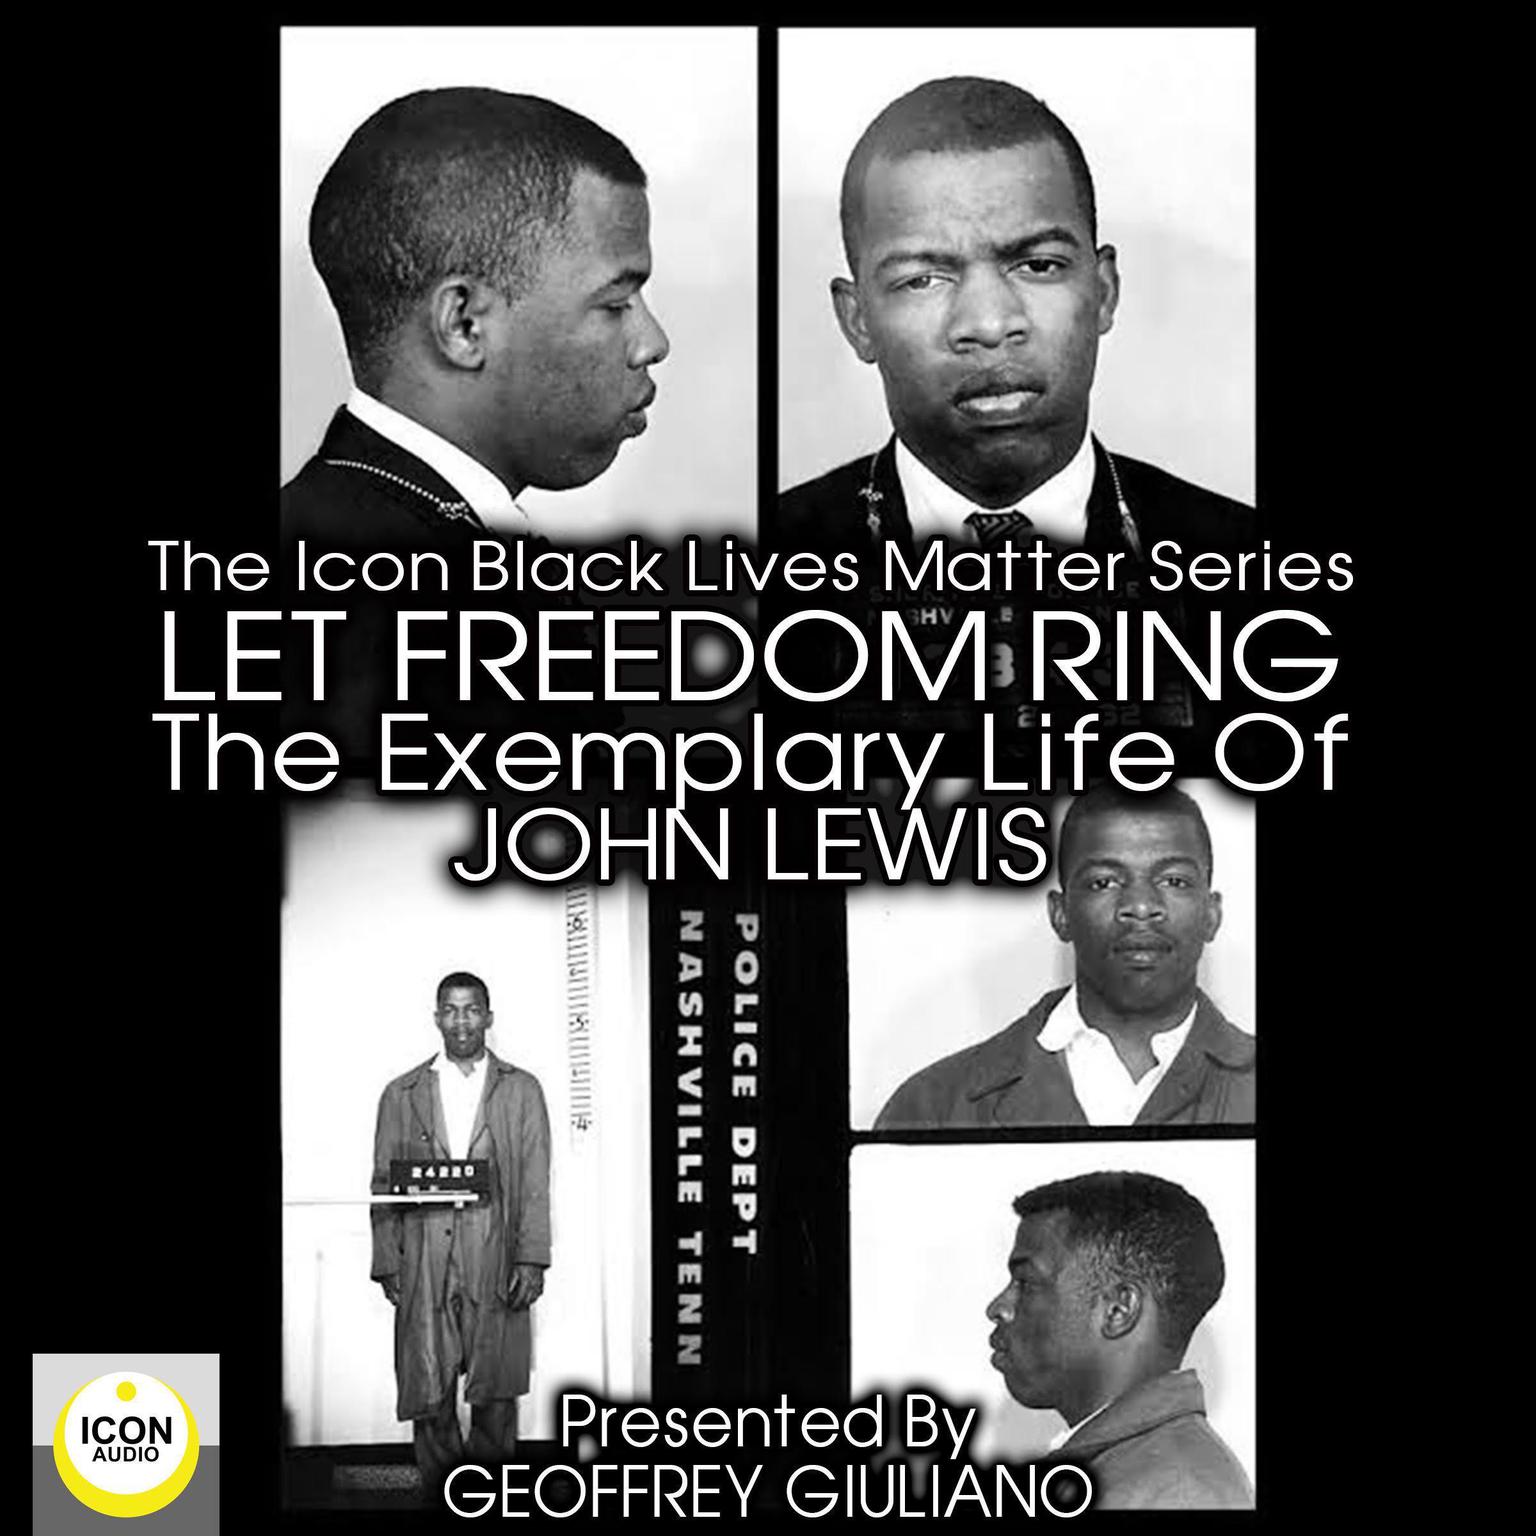 The Icon Black Matters Series: Let Freedom Ring, the Exemplary Life of John Lewis Audiobook, by Geoffrey Giuliano